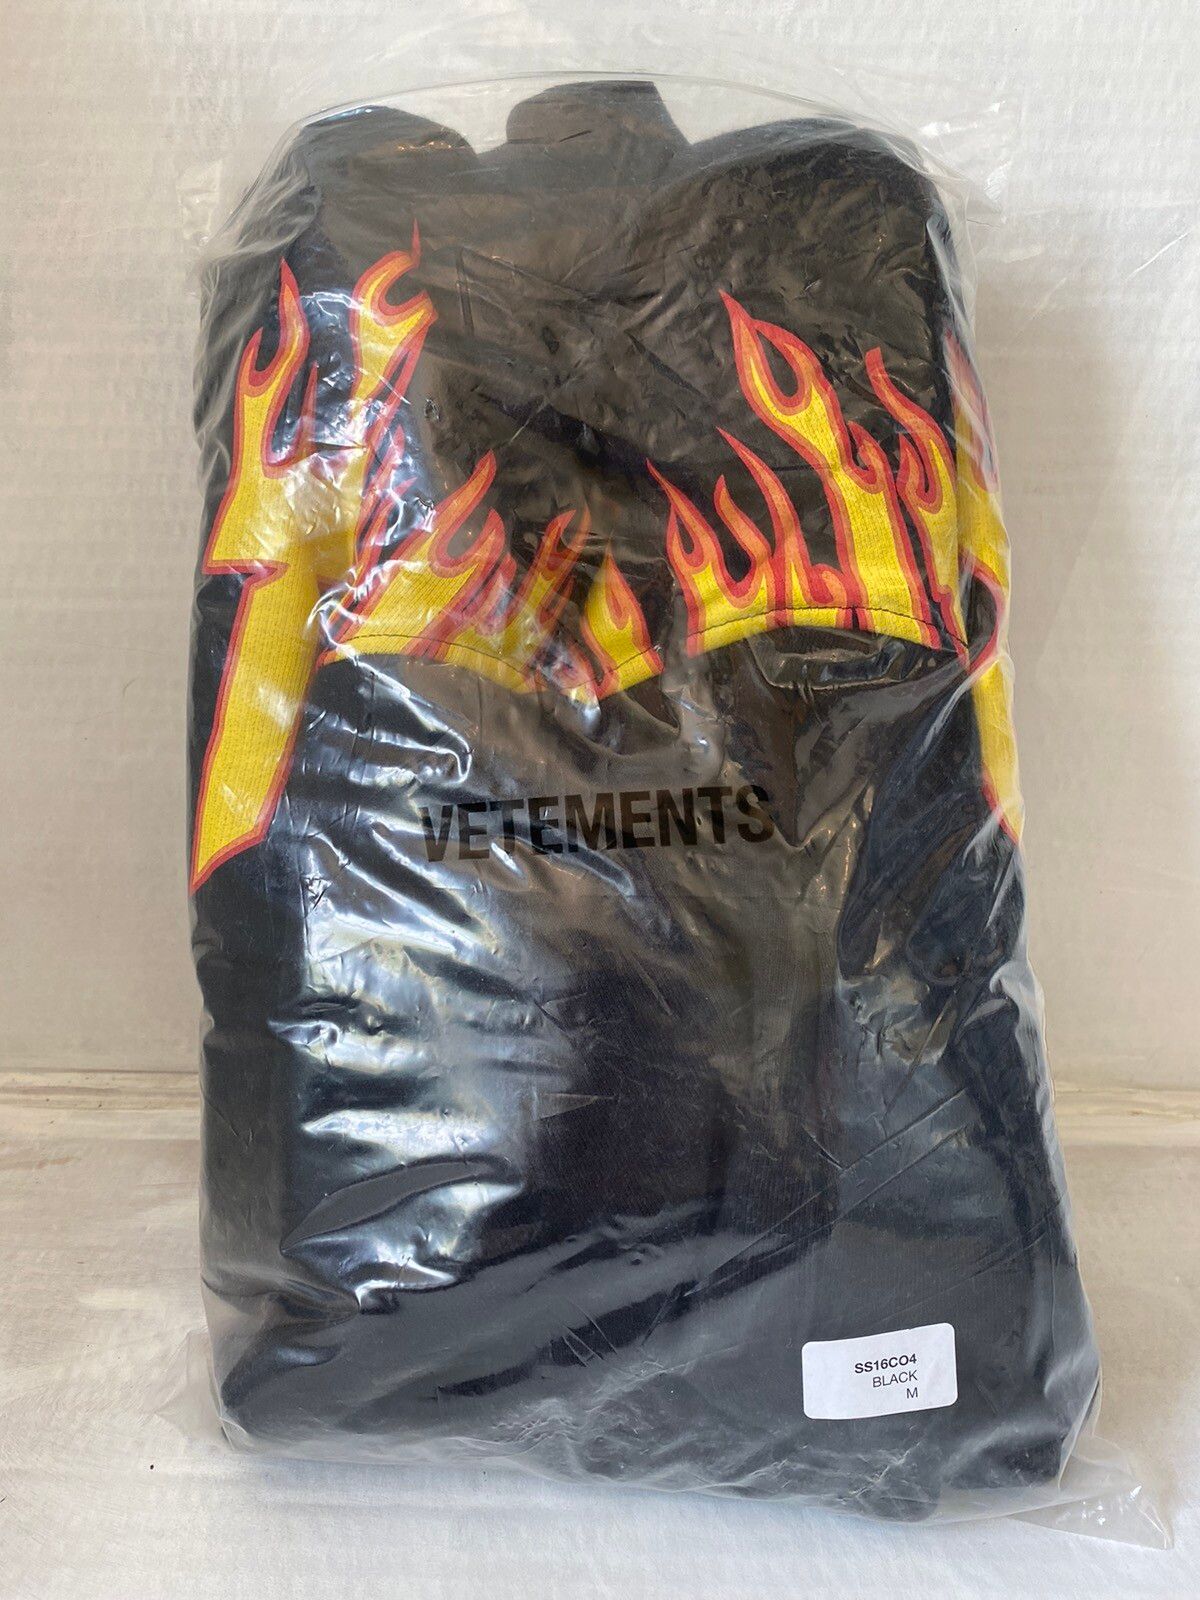 Vetements Vetements rare flame thrasher font hoodie medium with tags Size US M / EU 48-50 / 2 - 4 Preview